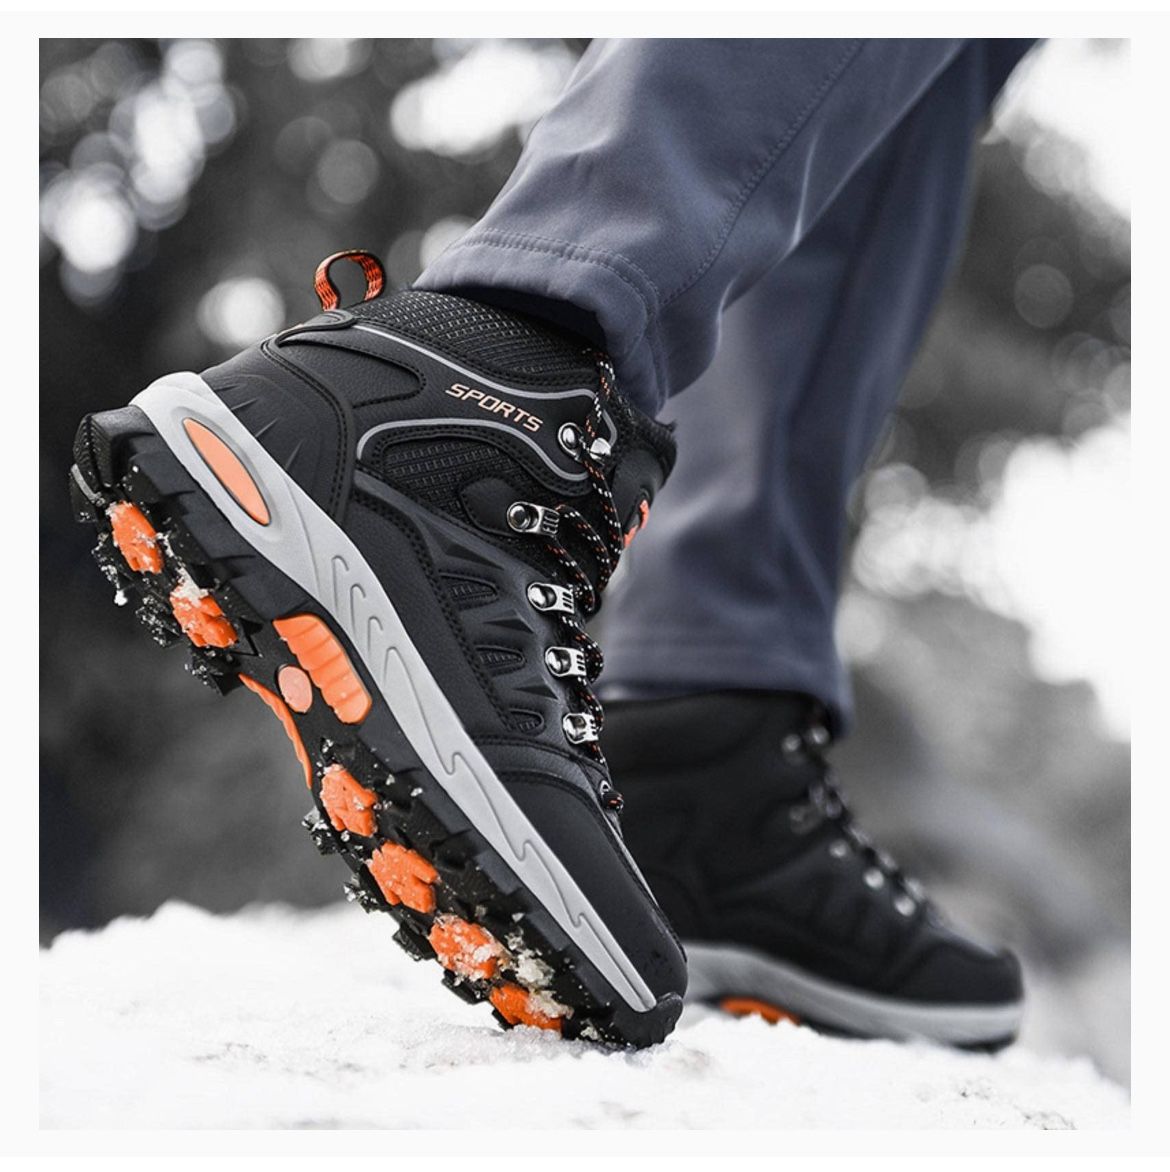 Sports  Mens Womens Winter Boots,Anti-Slip Leather Warm Snow Boots Water Resistant Shoes Fur Lined,Black Hiking